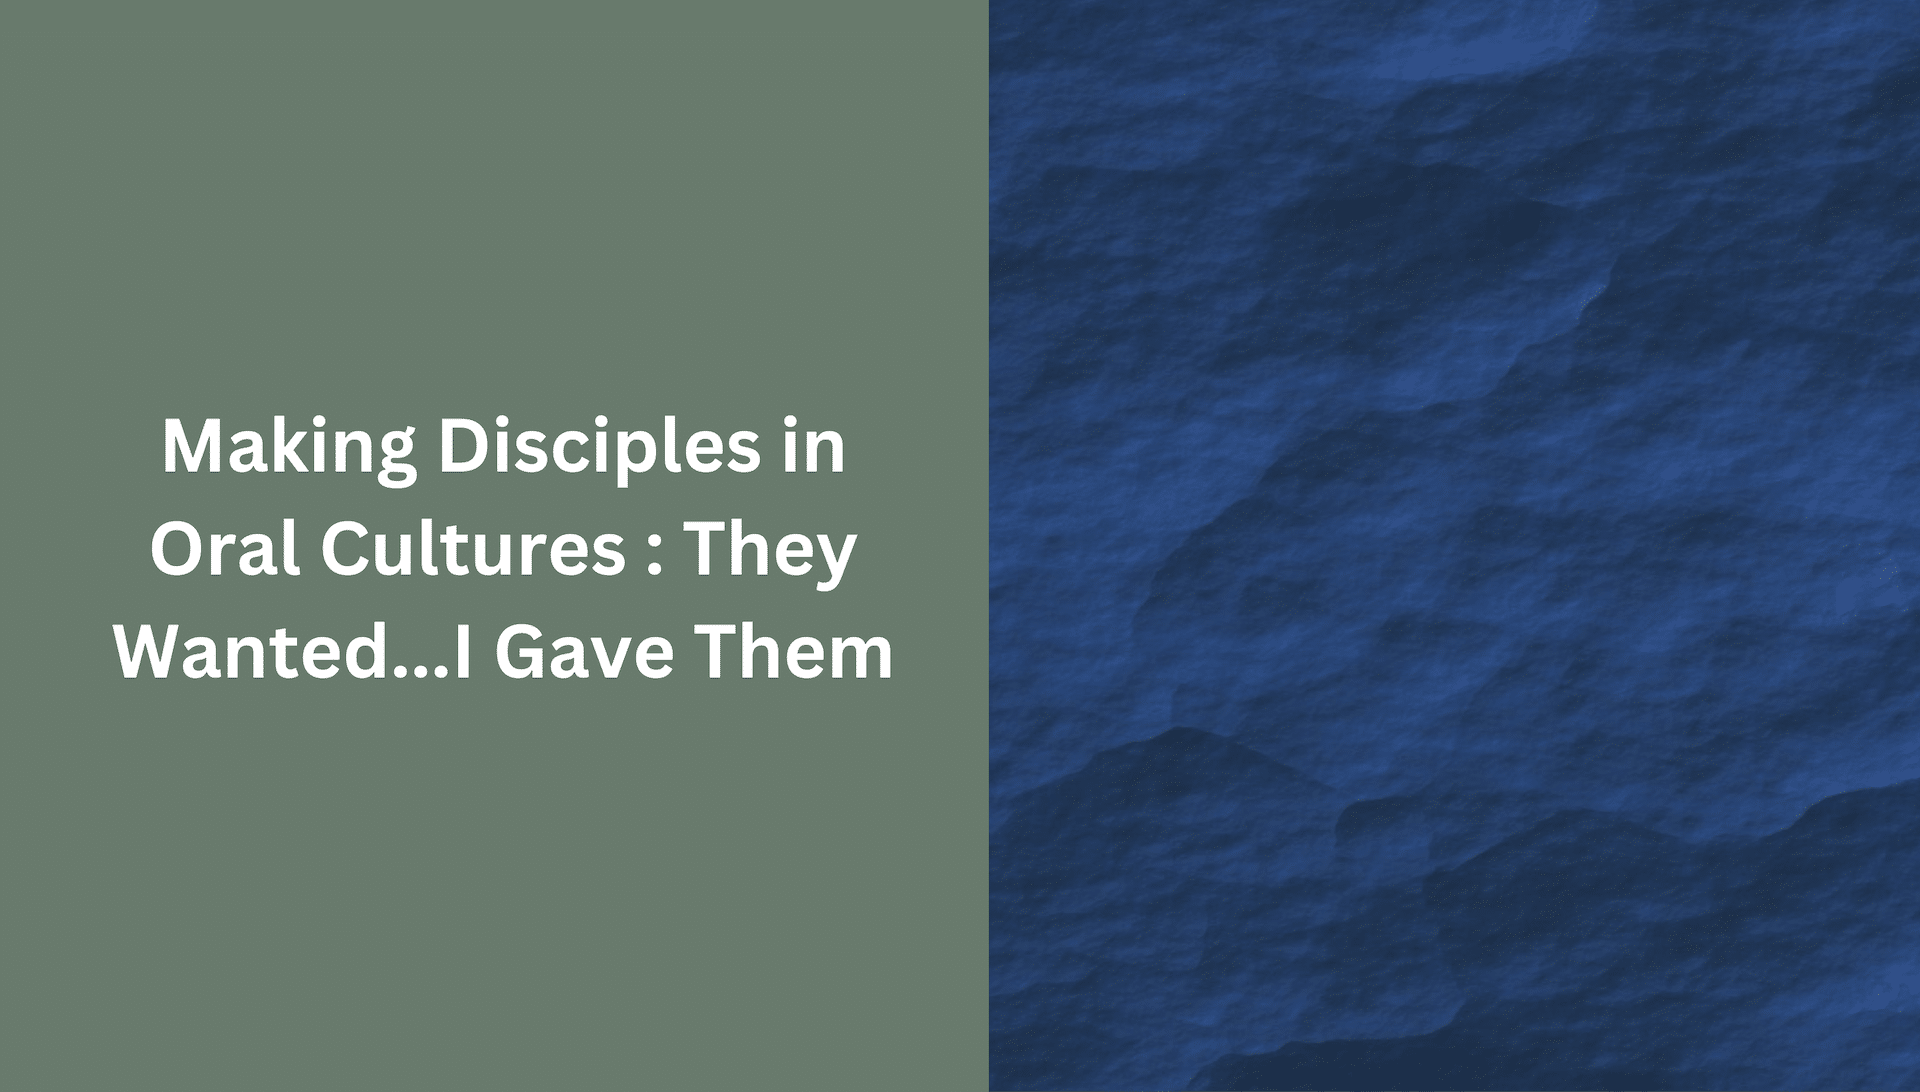 Making disciples in oral cultures: They wanted..I gave them